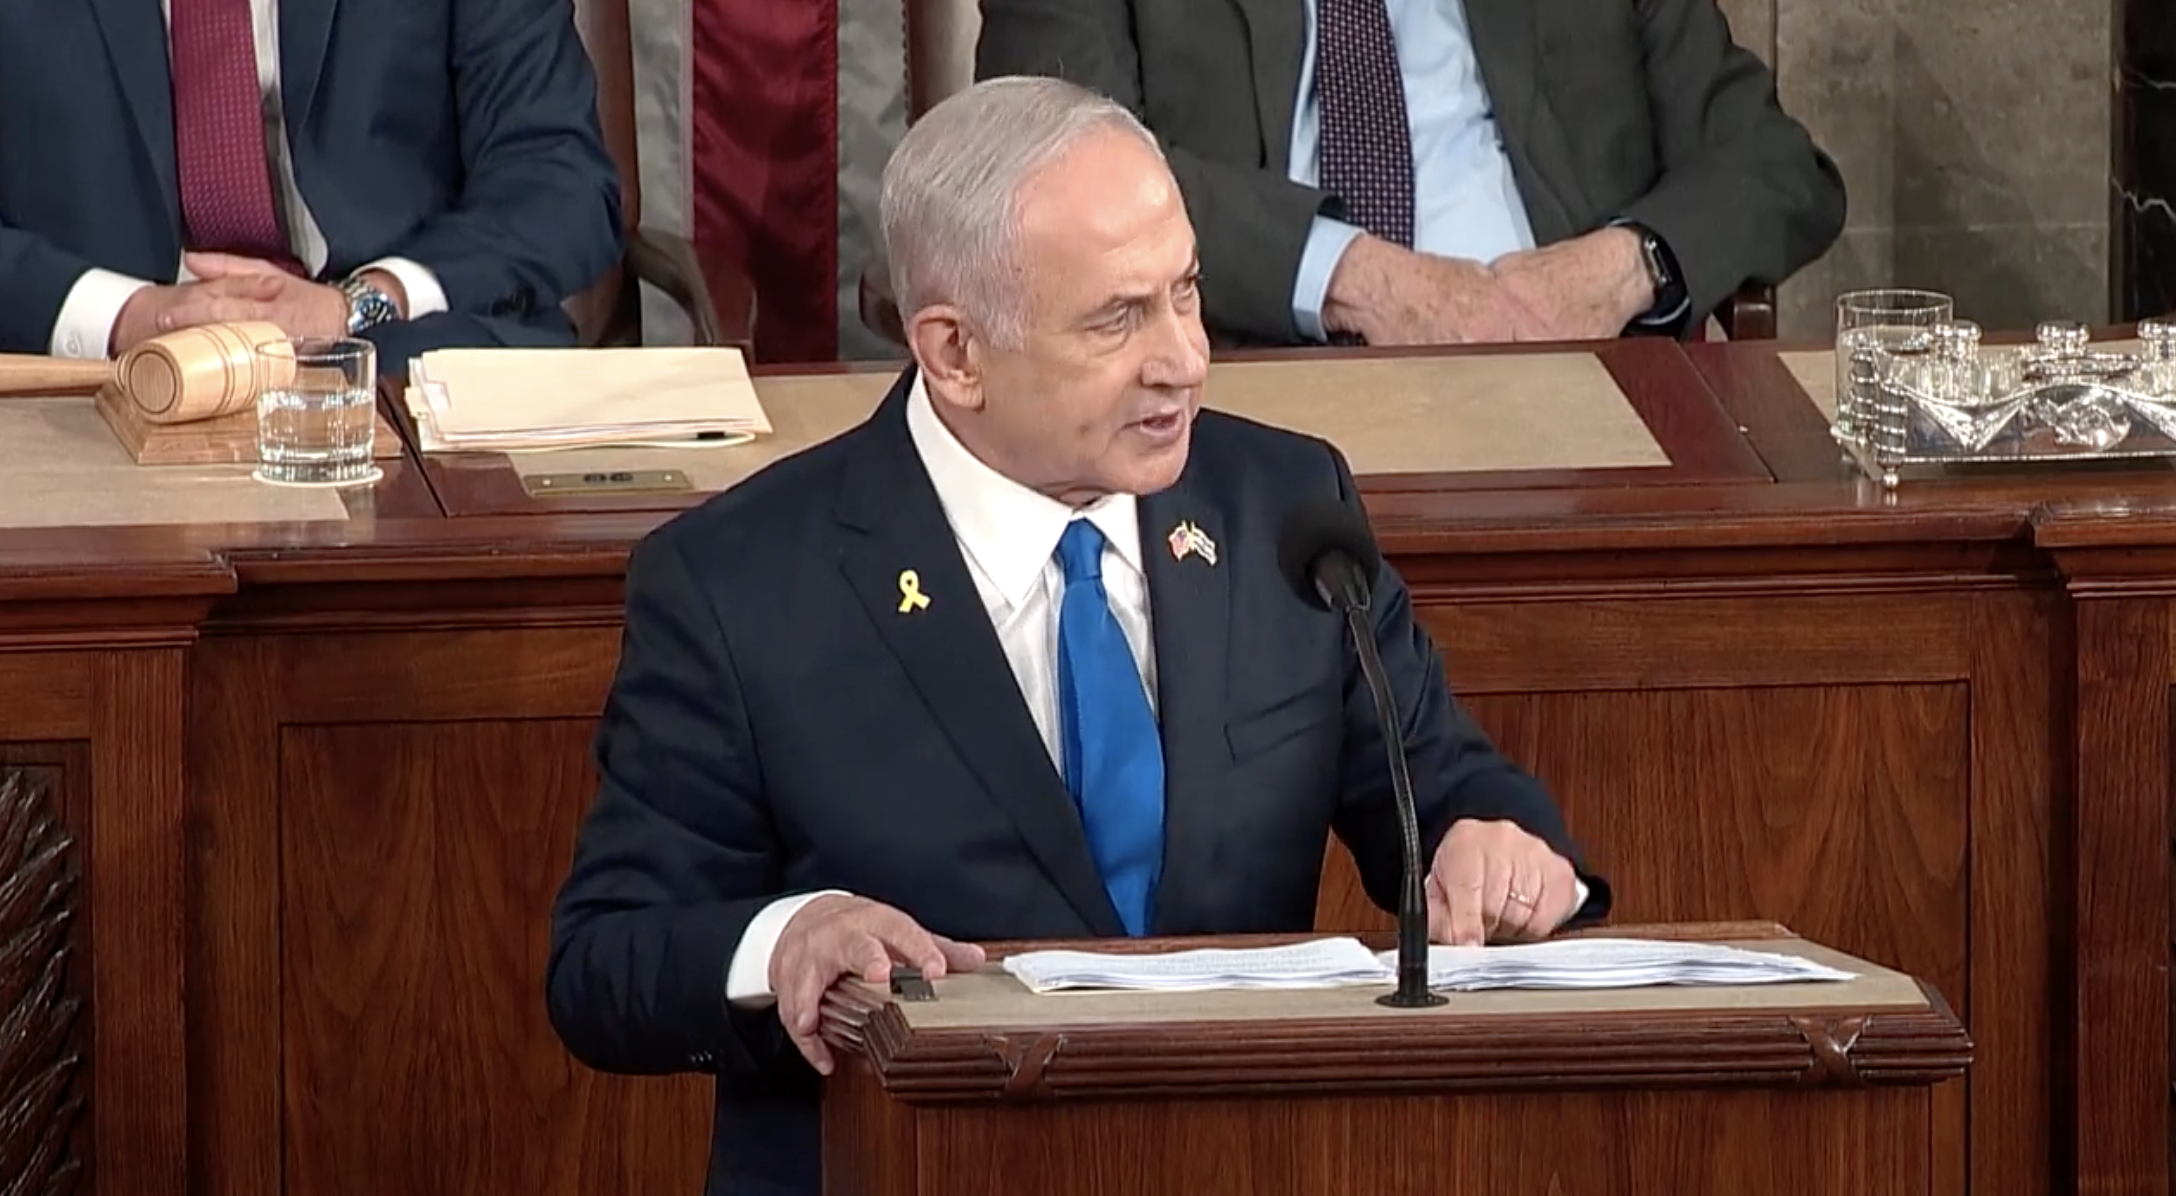 Netanyahu Delivers Joint Address to Congress, Some Lawmakers Boycott Speech